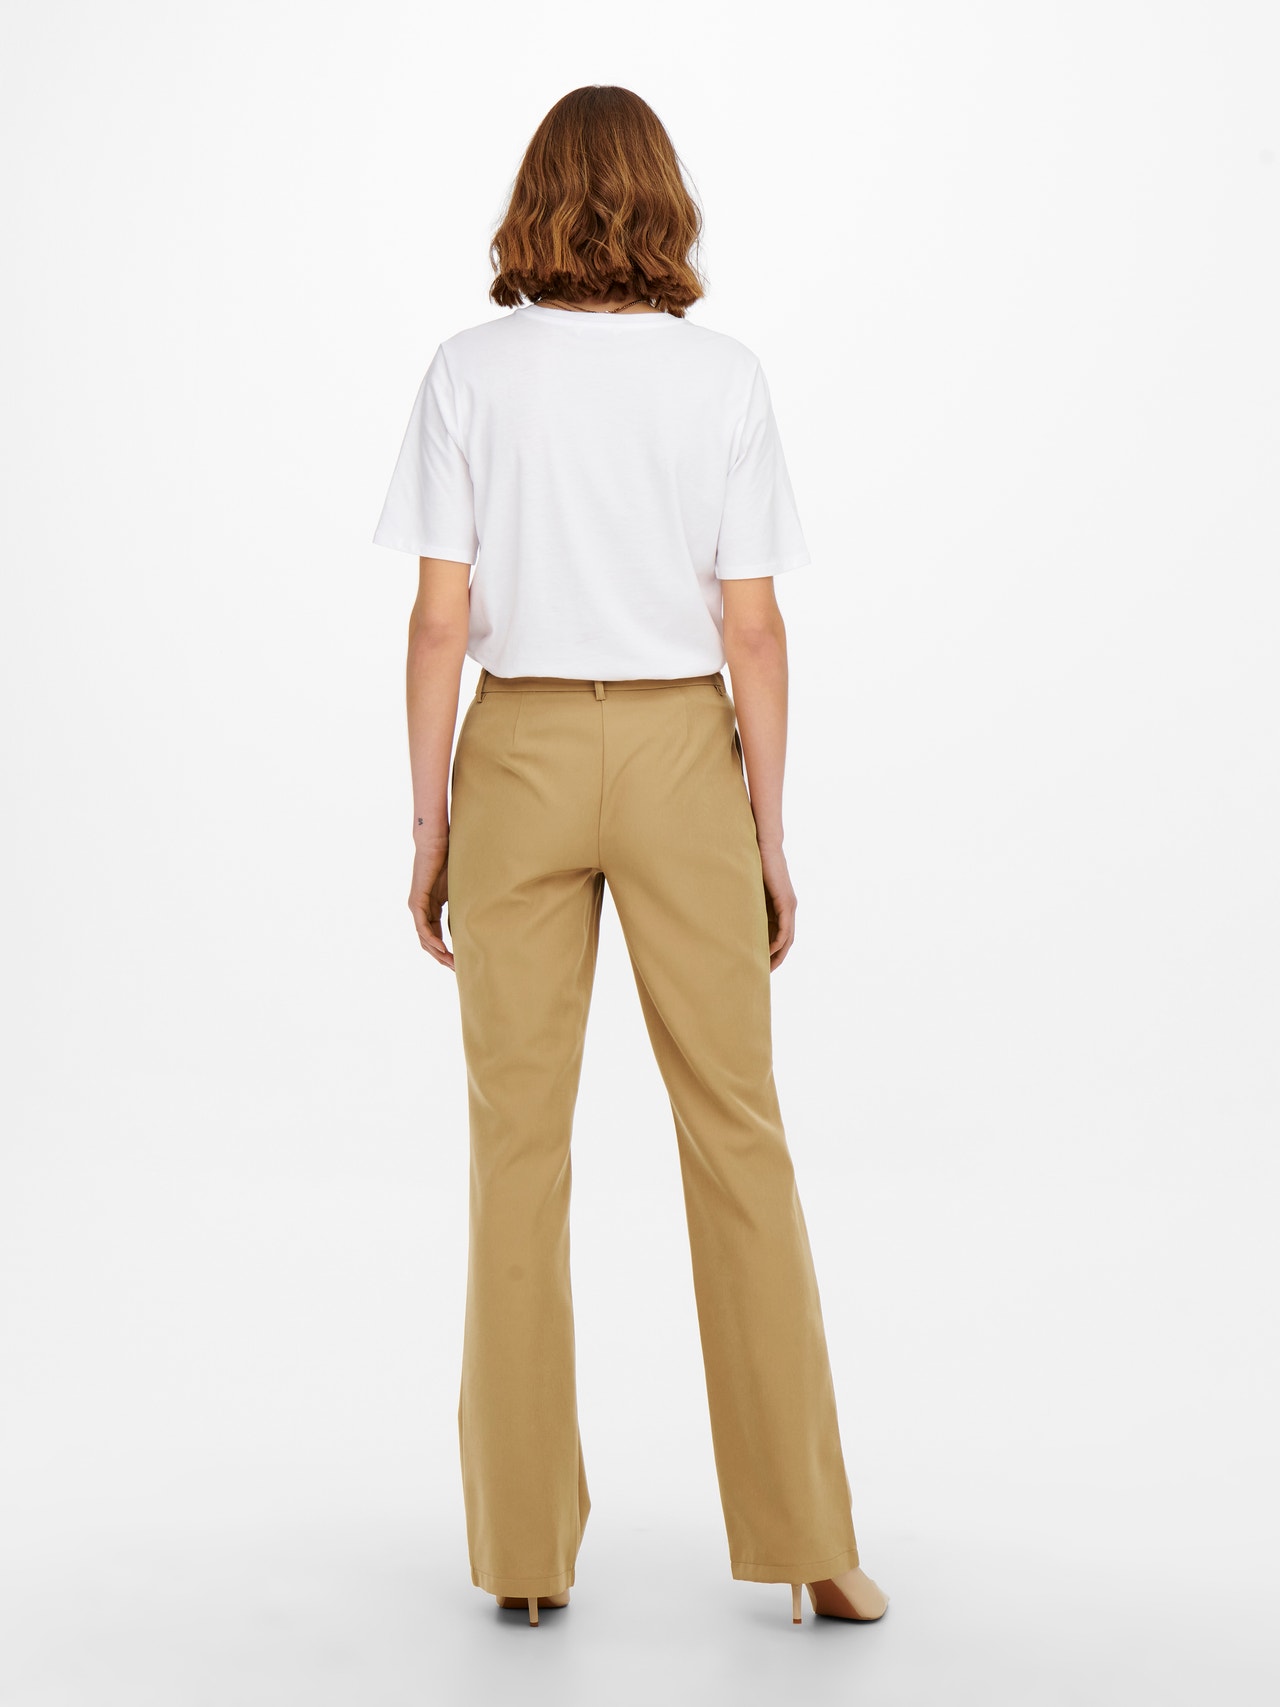 ONLY Flared Fit Mid waist Flared legs Trousers -Tannin - 15245640